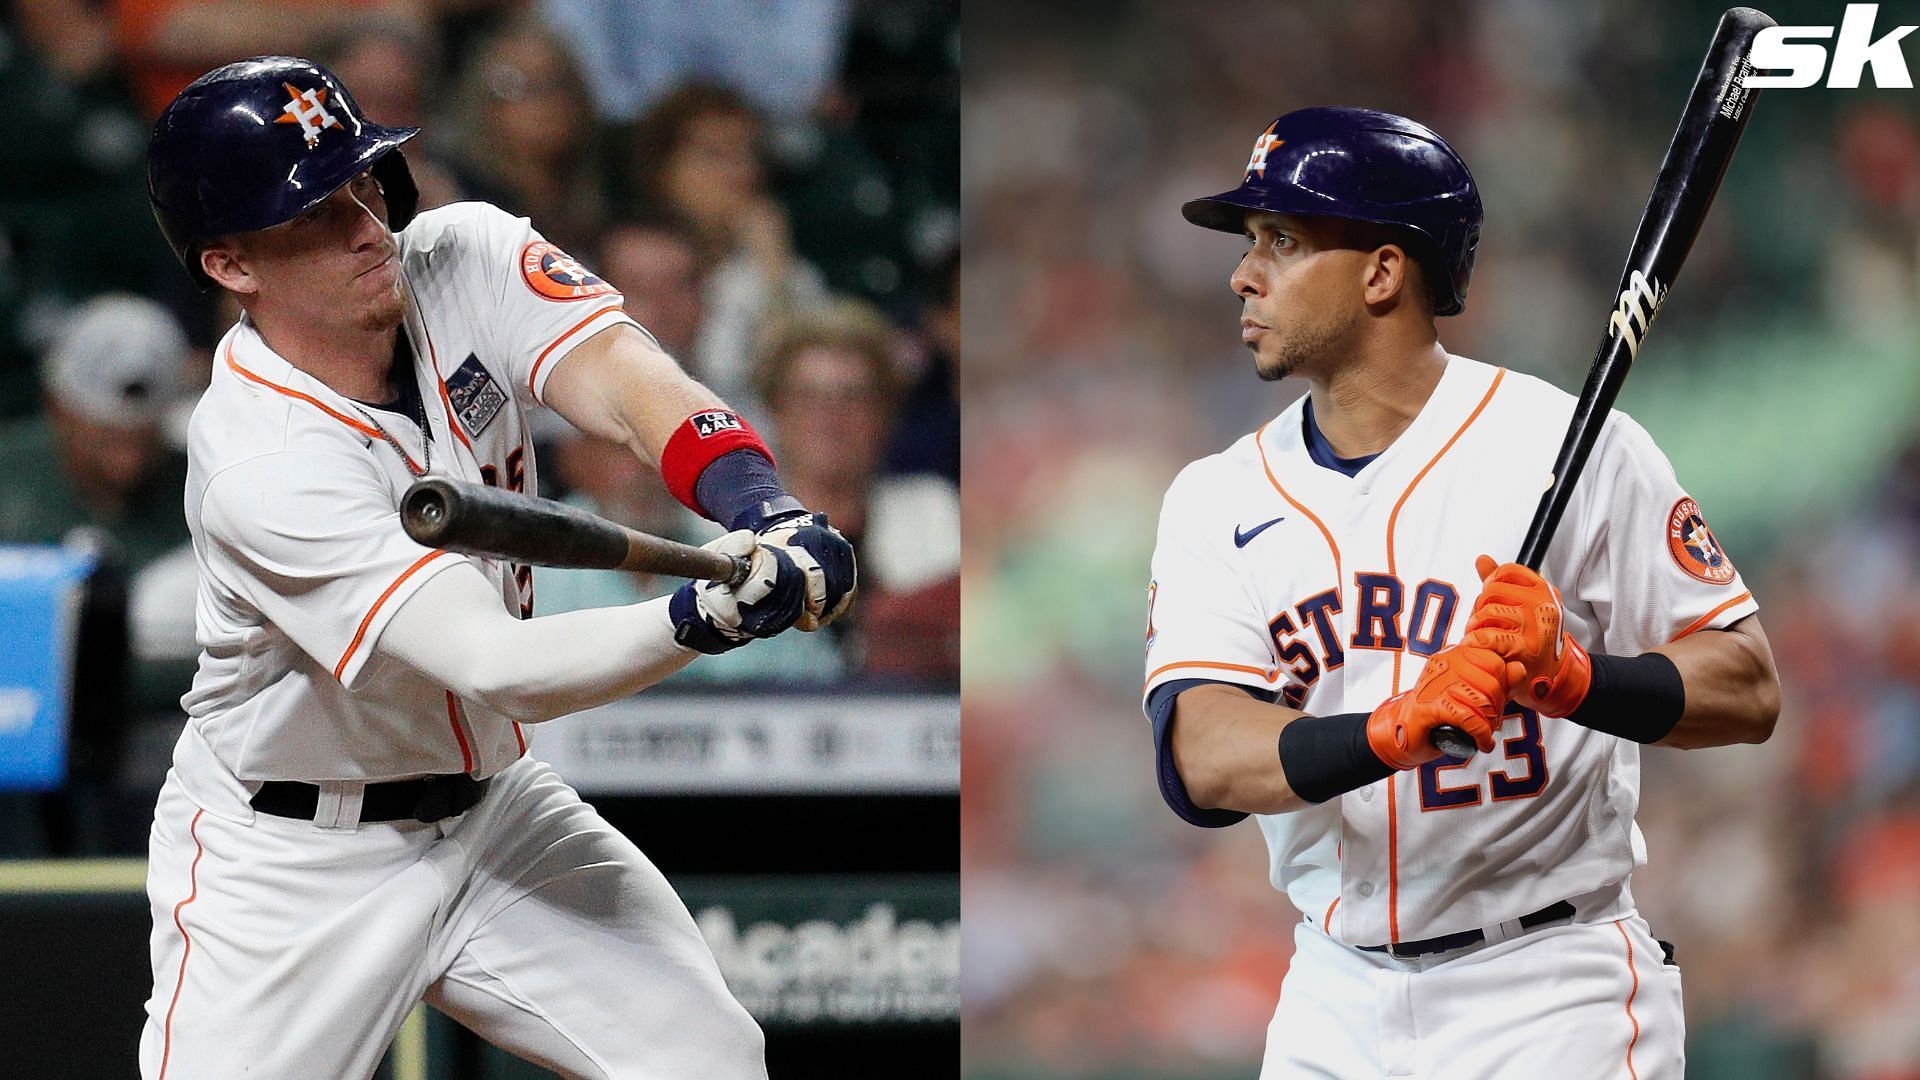 Former Astros outfielder Myles Straw pays tribute to the retiring Michael Brantley